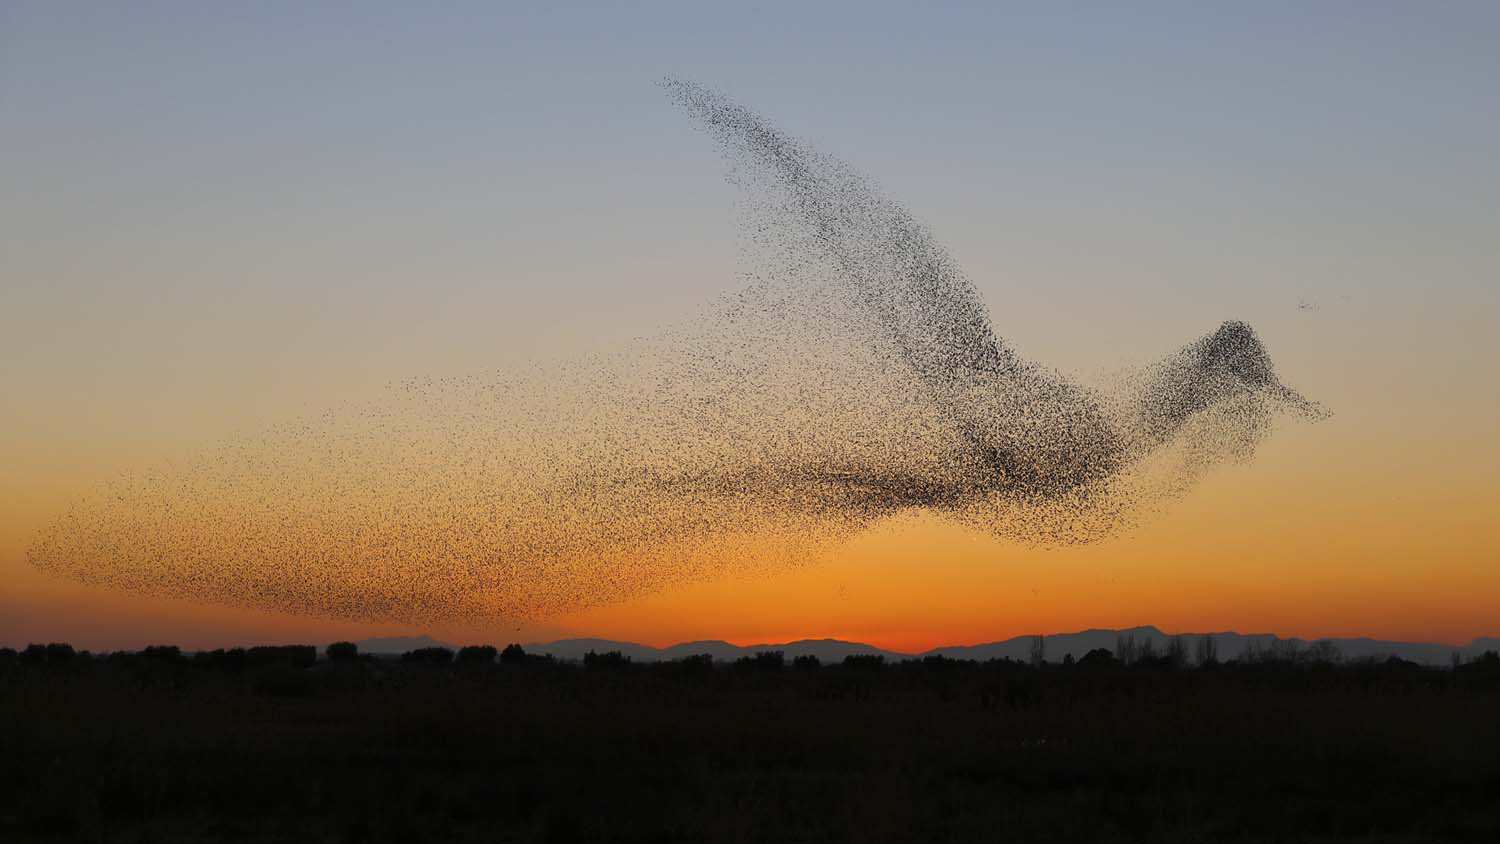 Starling Murmuration - The Reason Behind Birds Flocking Together